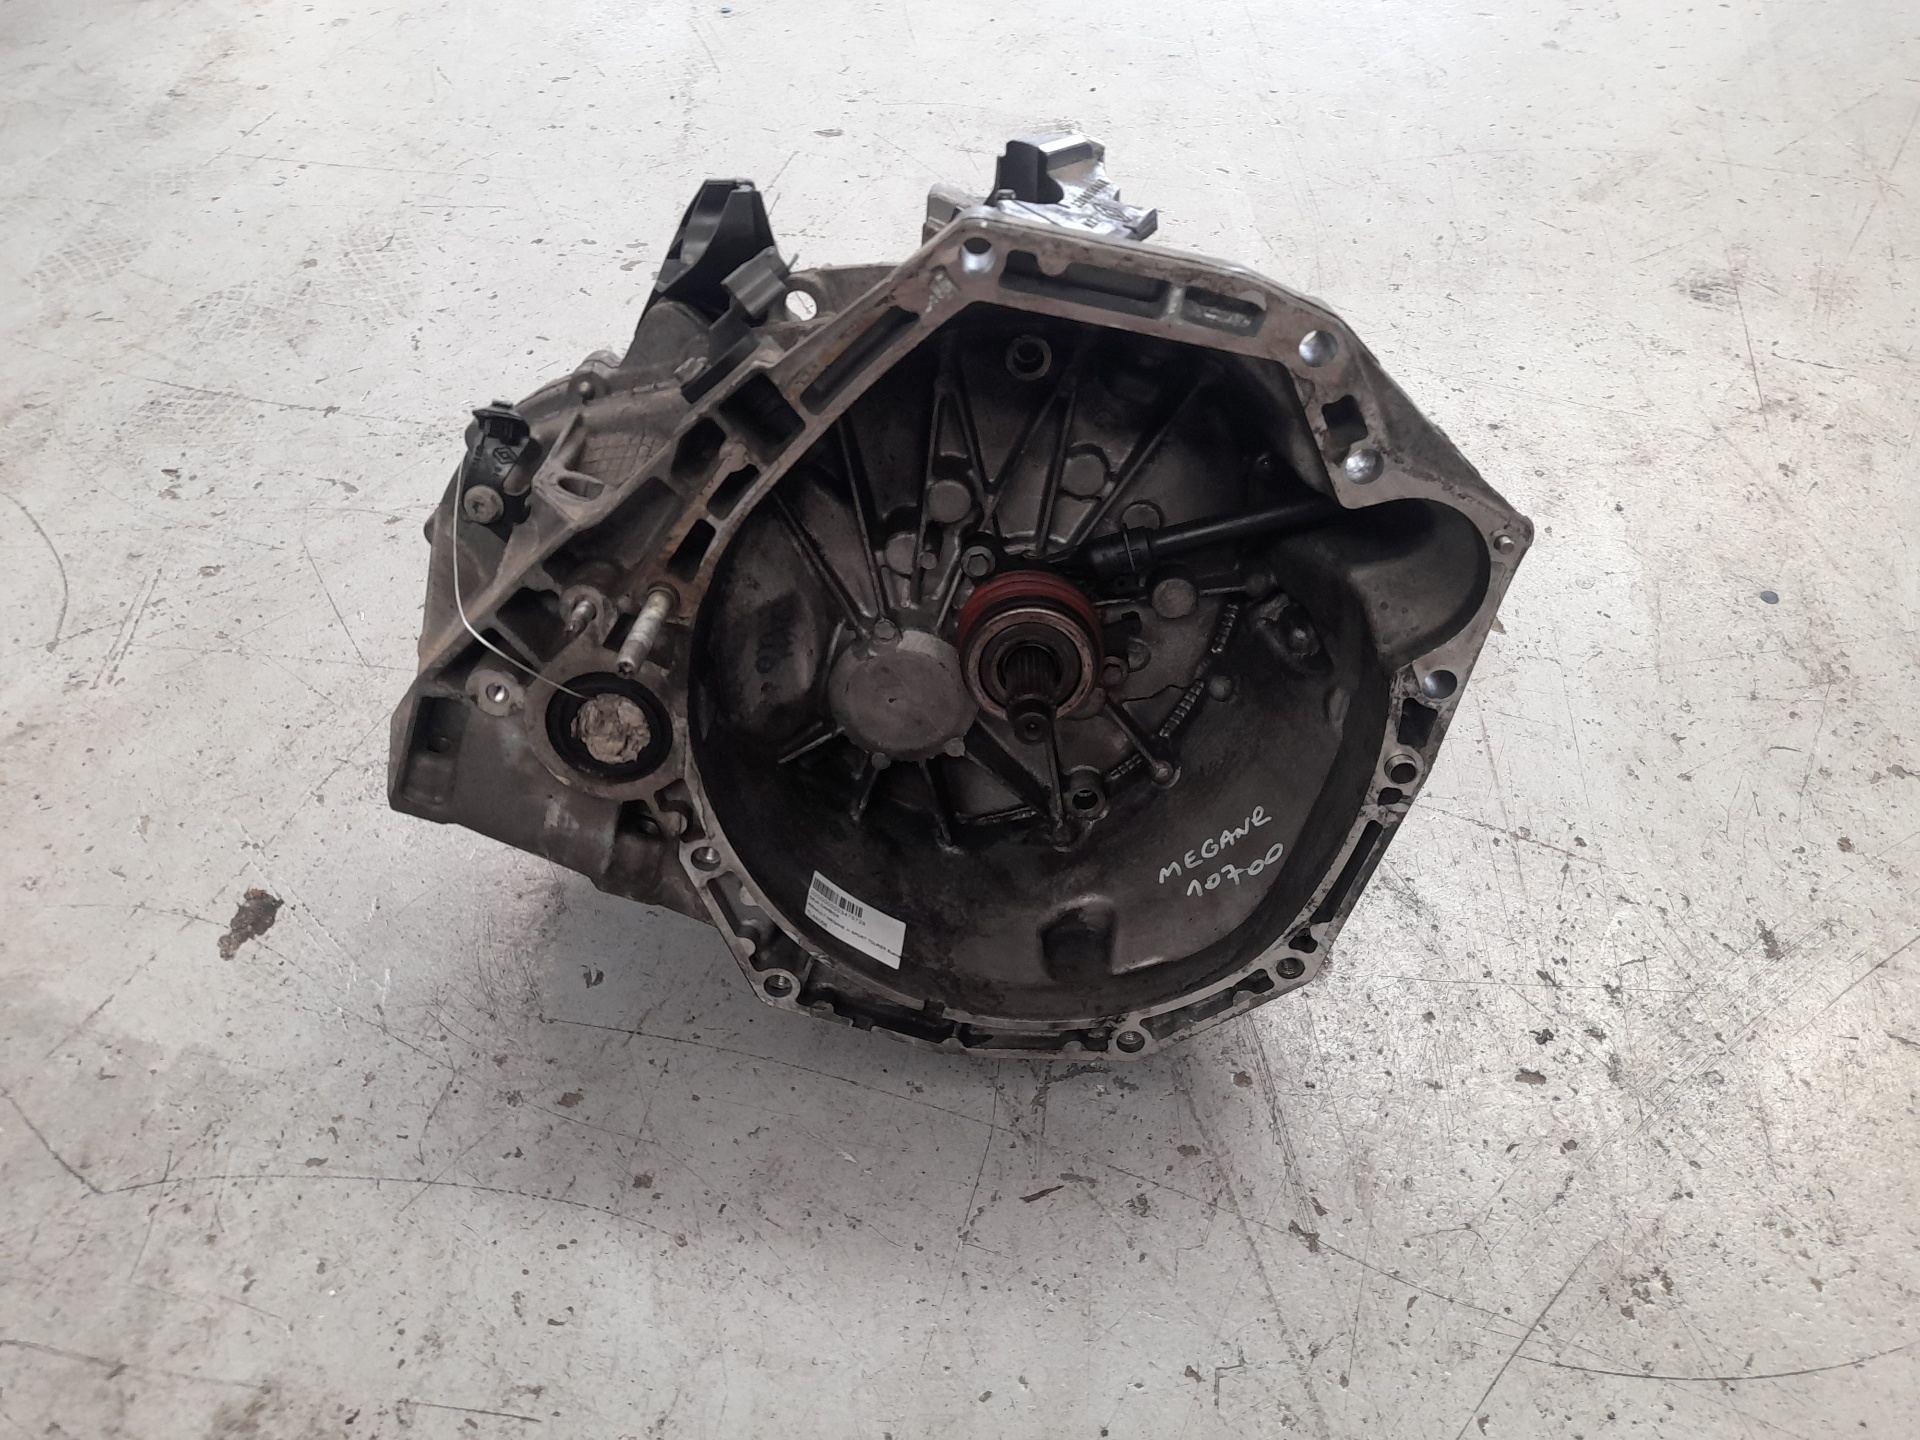 VAUXHALL Megane 3 generation (2008-2020) Gearbox TL4A056 25277299